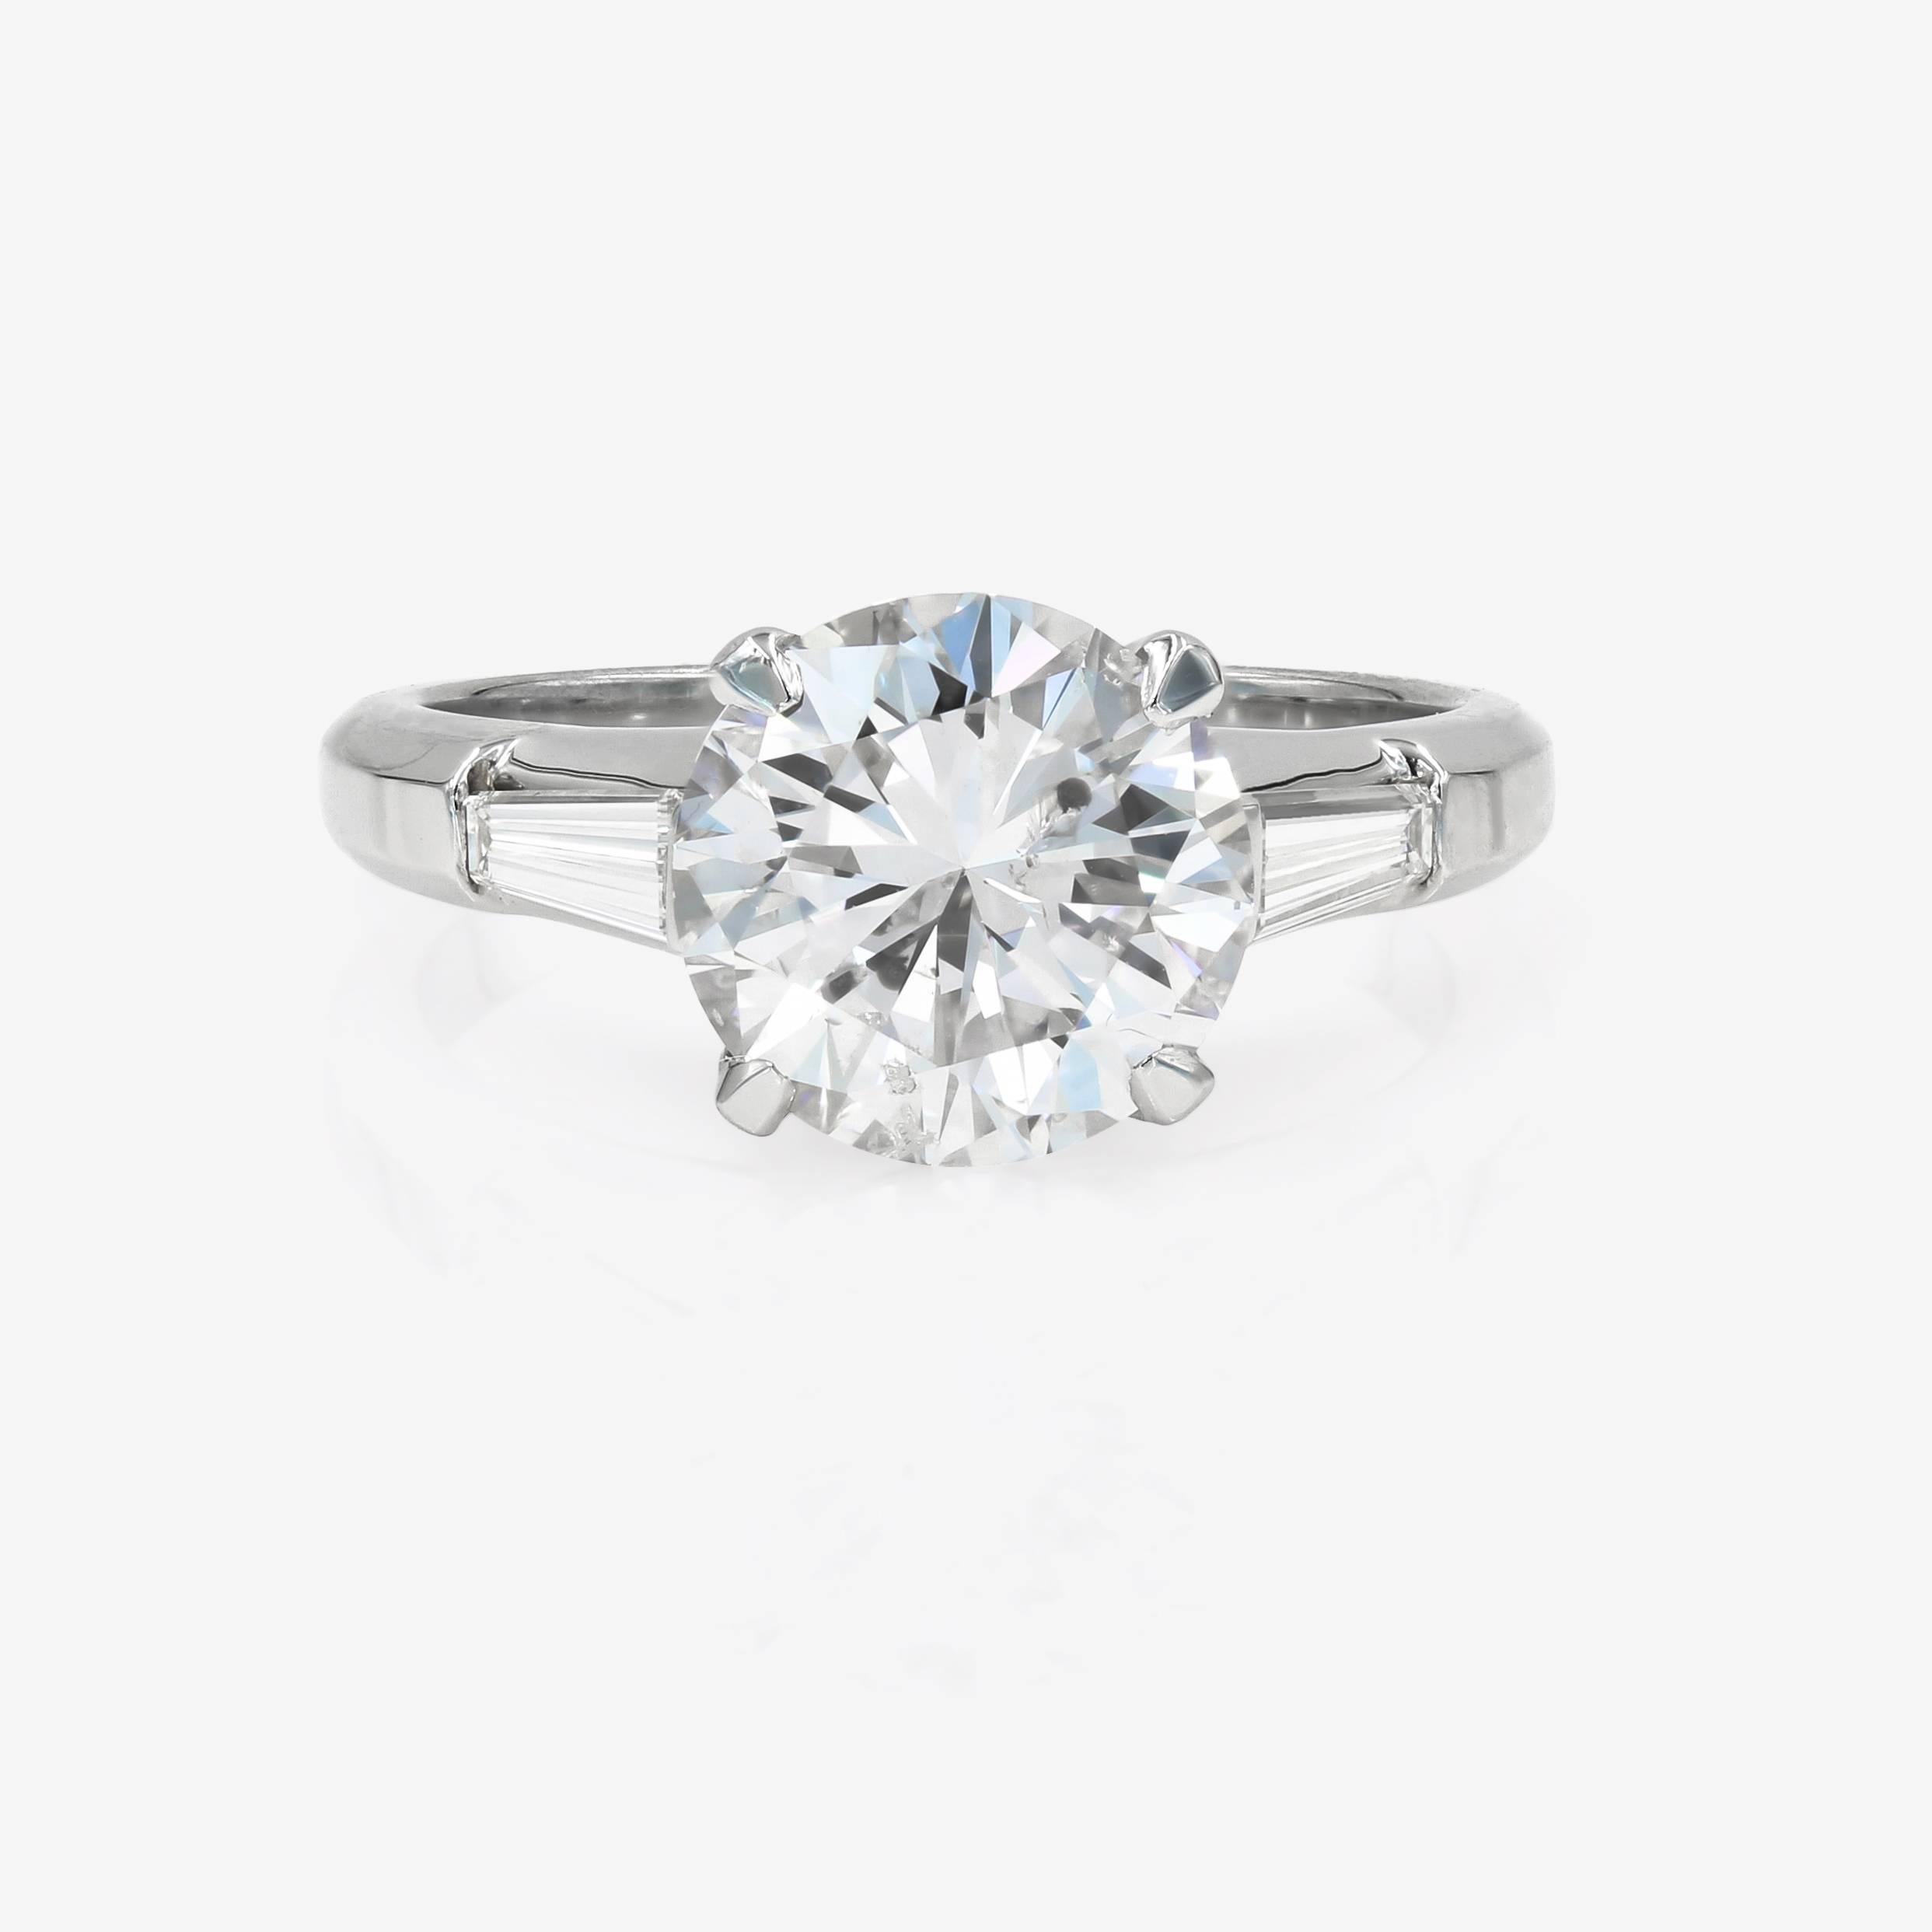 Contemporary GIA Certified 3.03cts. Round Diamond set in a Lester Lampert Signature Mounting